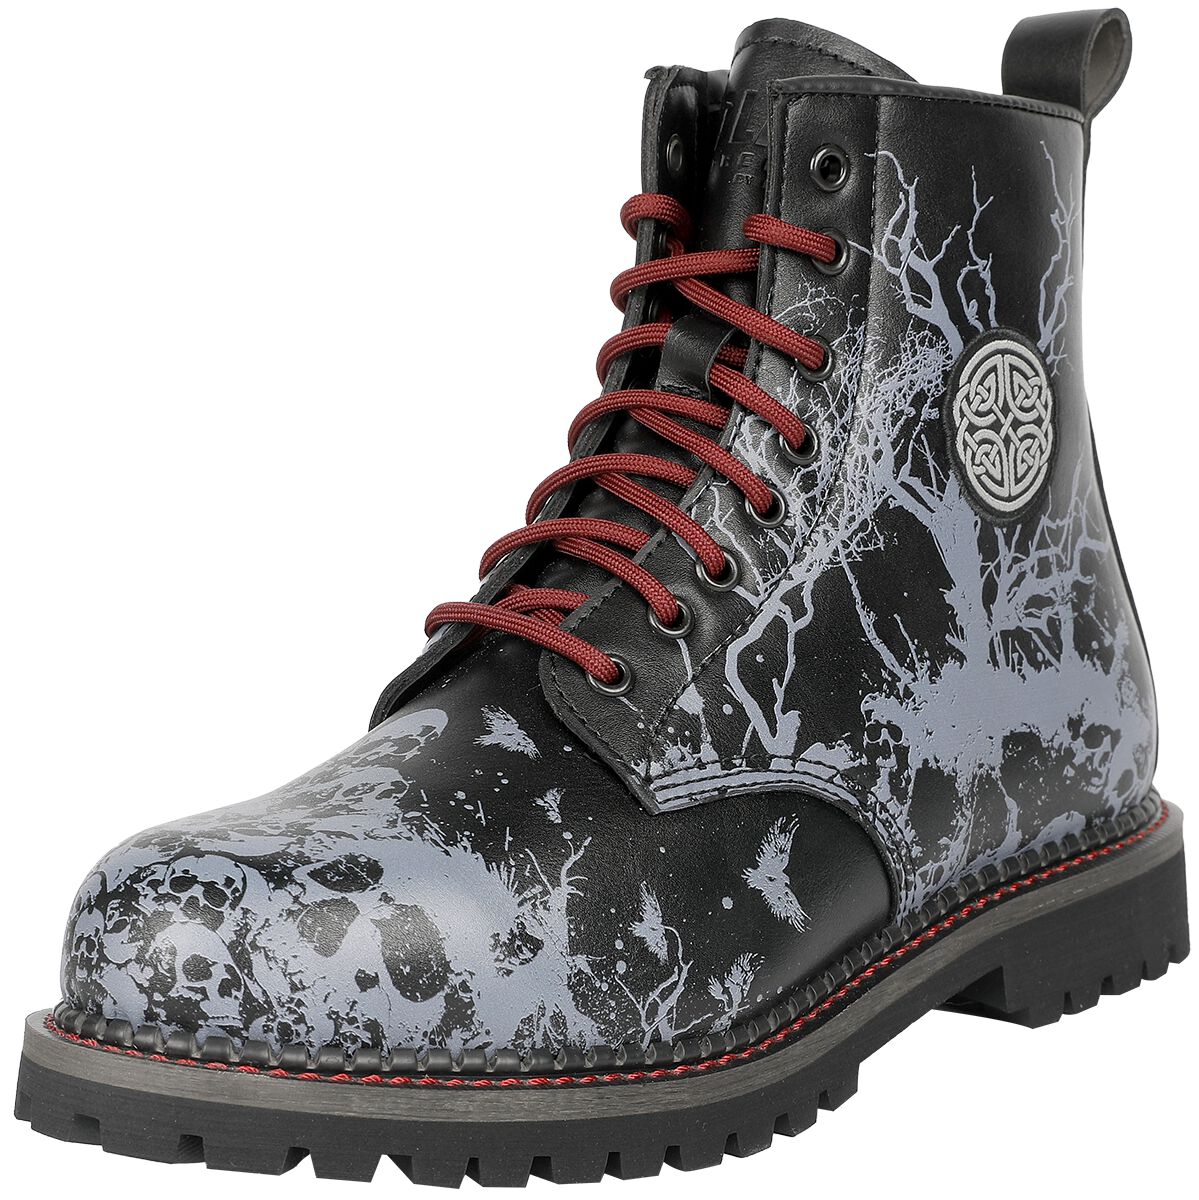 Black Premium by EMP Boots with Skull Alloverprint and Red Details Stiefel schwarz grau in EU42